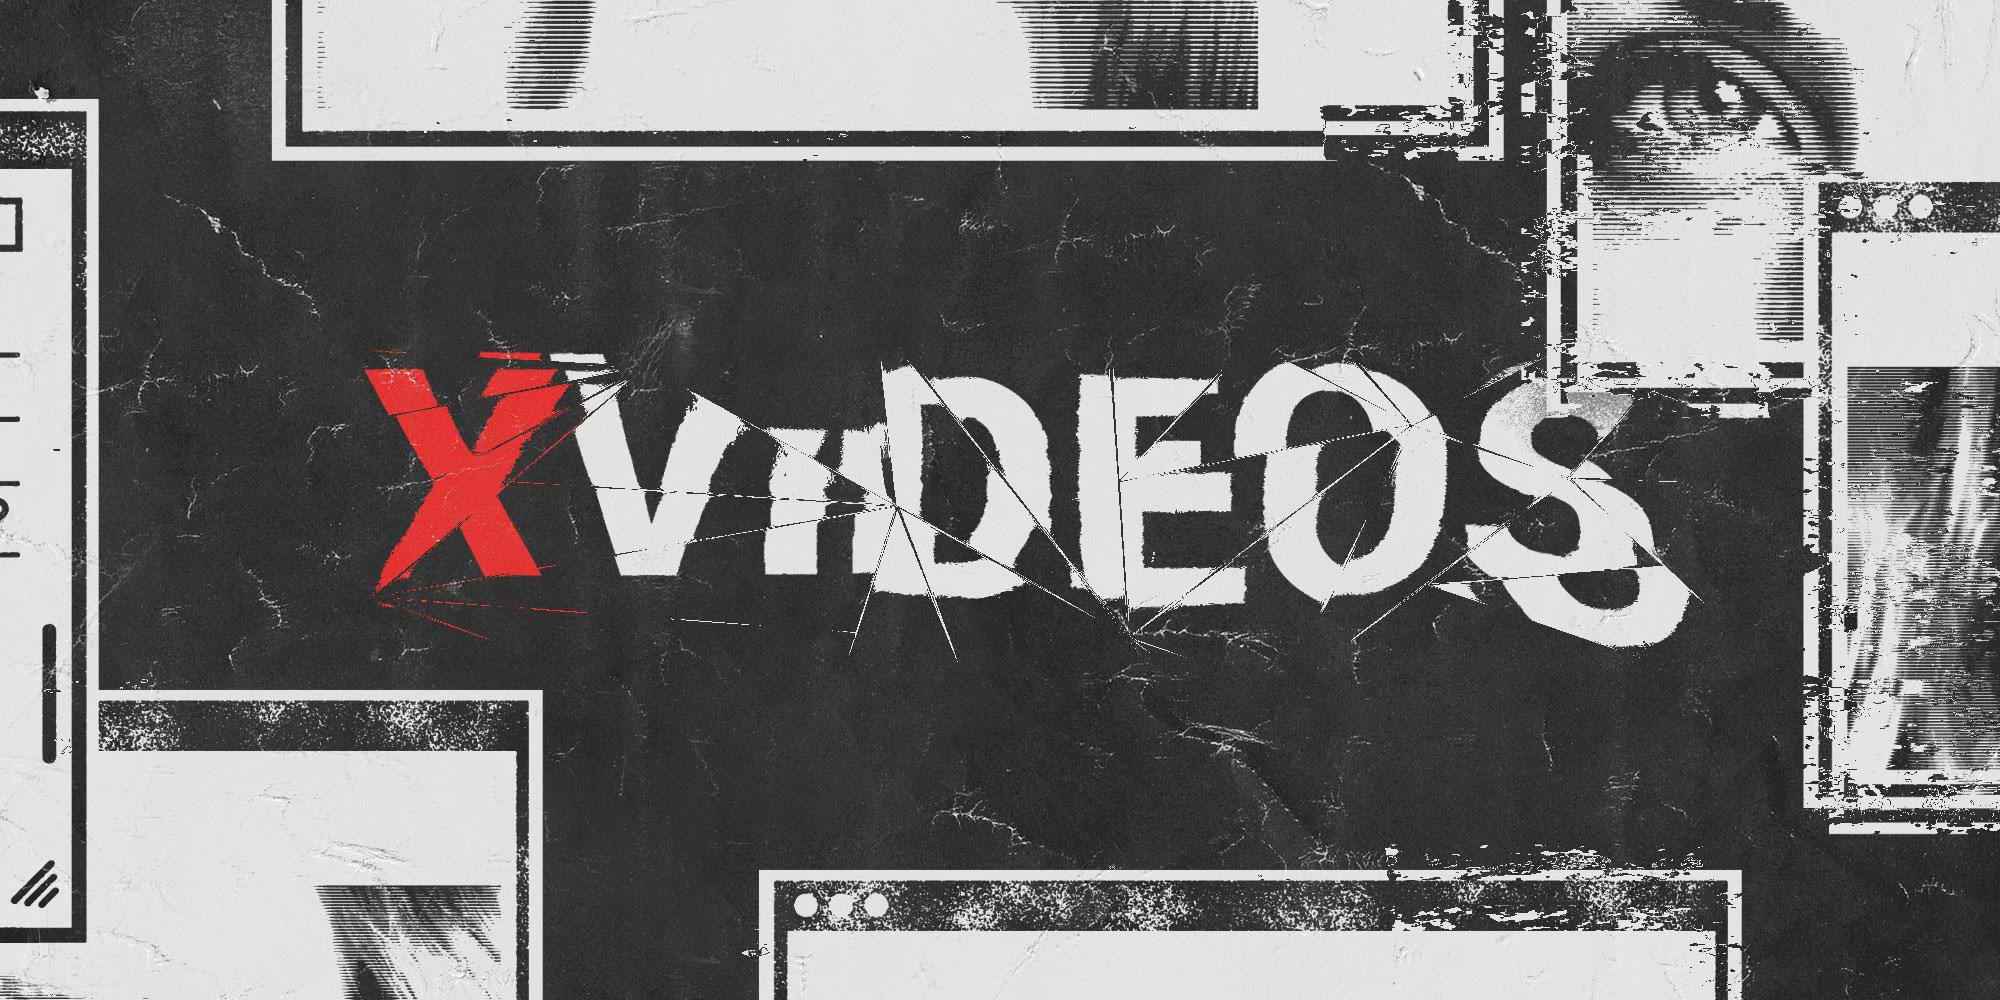 Xxxvidioes Download - XVideos, World's Most Popular Porn Site, Reportedly Hosts Nonconsensual  Content & Child Exploitation